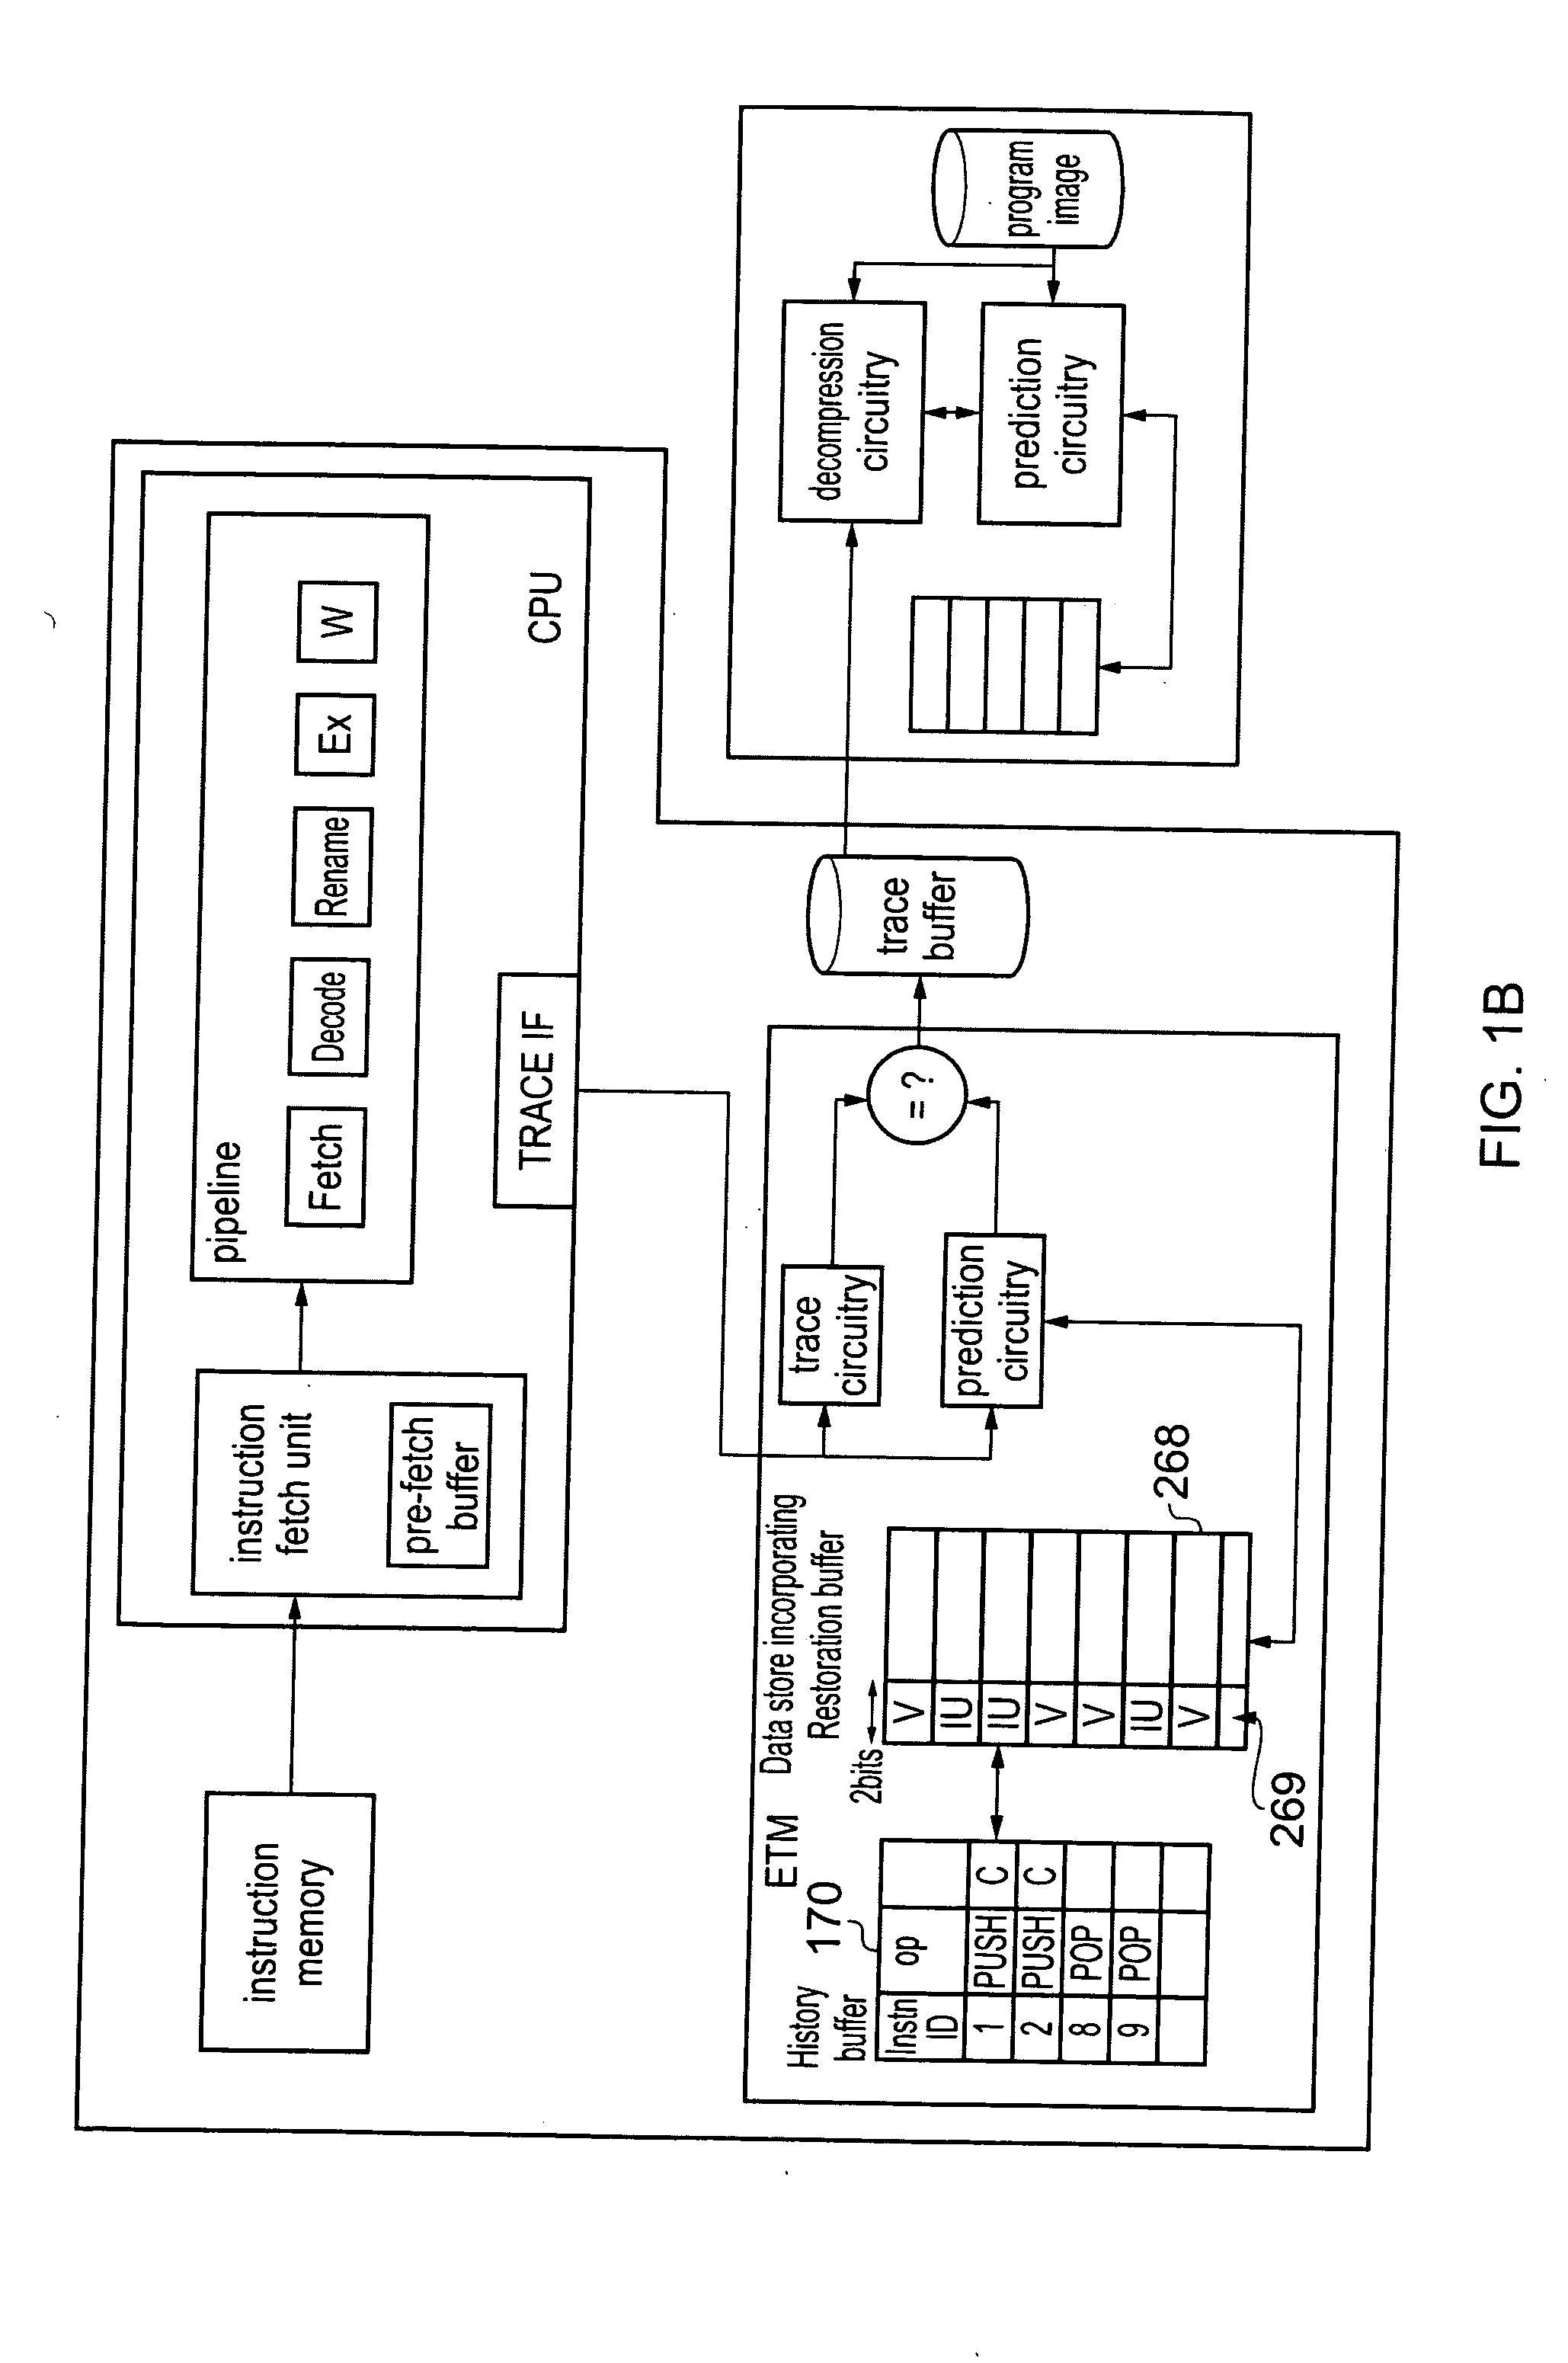 System for efficiently tracing data in a data processing system